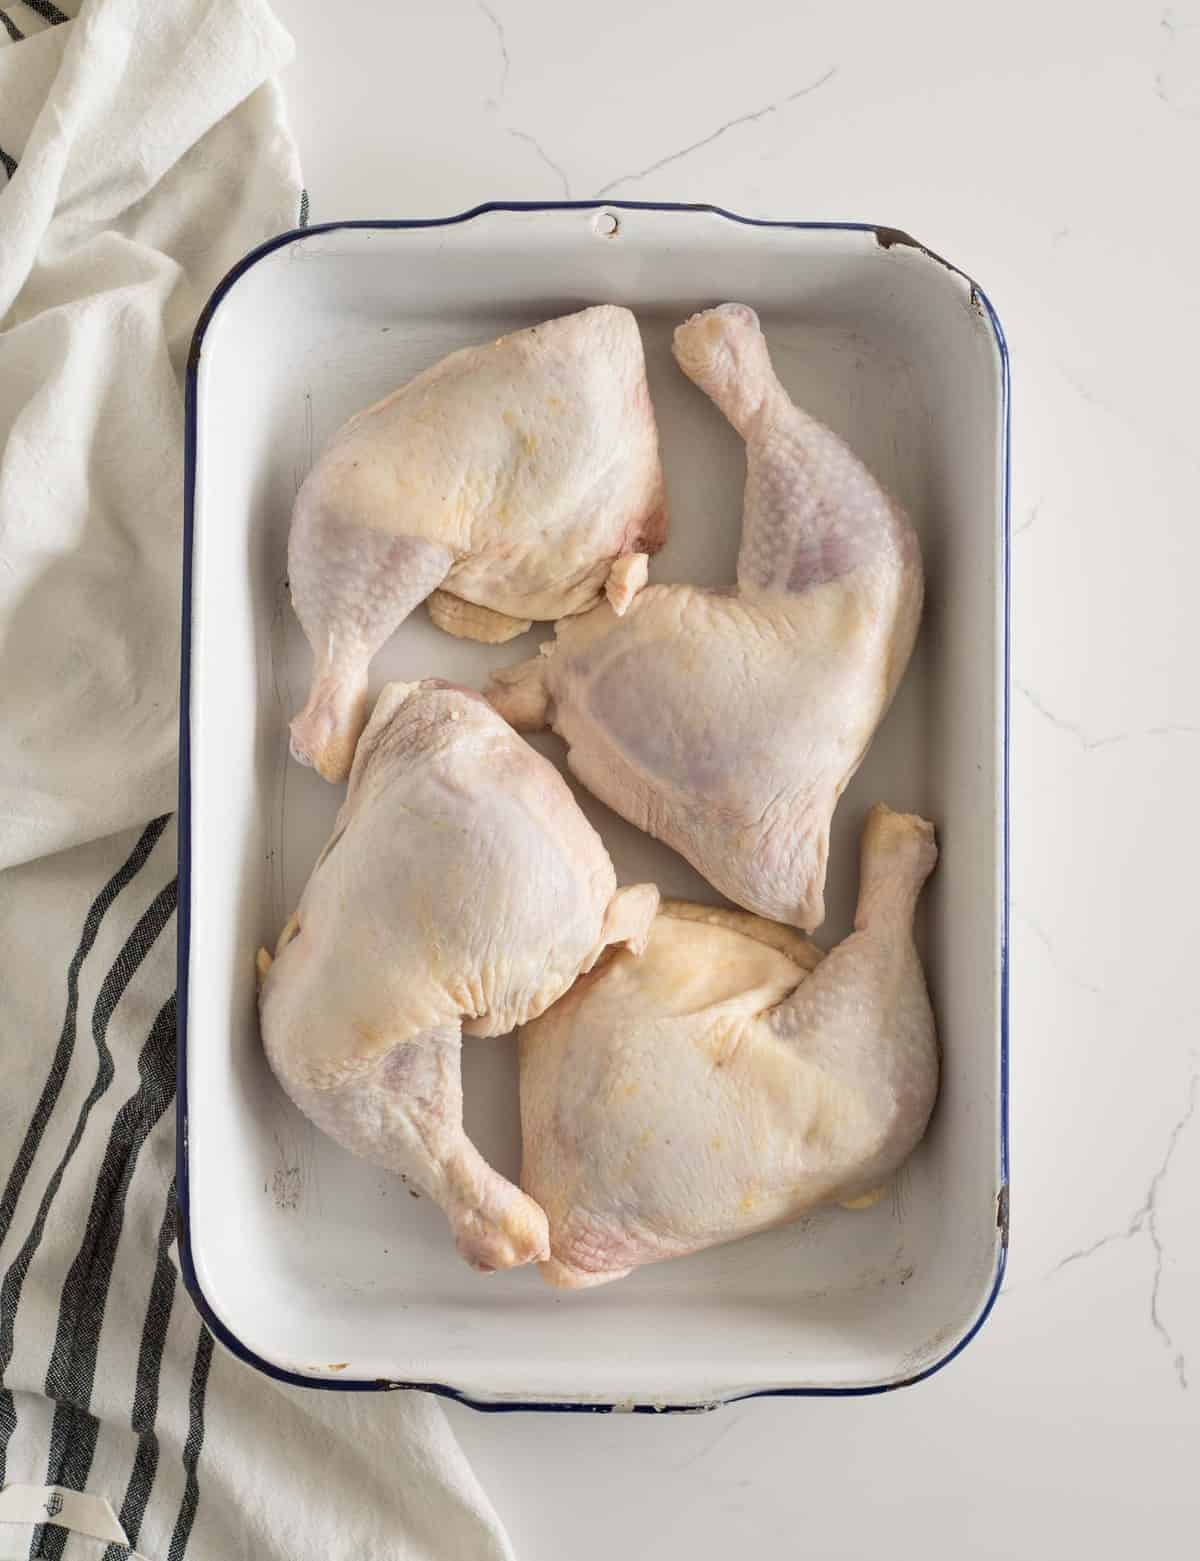 Ever wonder how long to bake chicken leg quarters, thighs, or legs? This post will tell you just that plus the difference in various cuts, and how to best cook them.